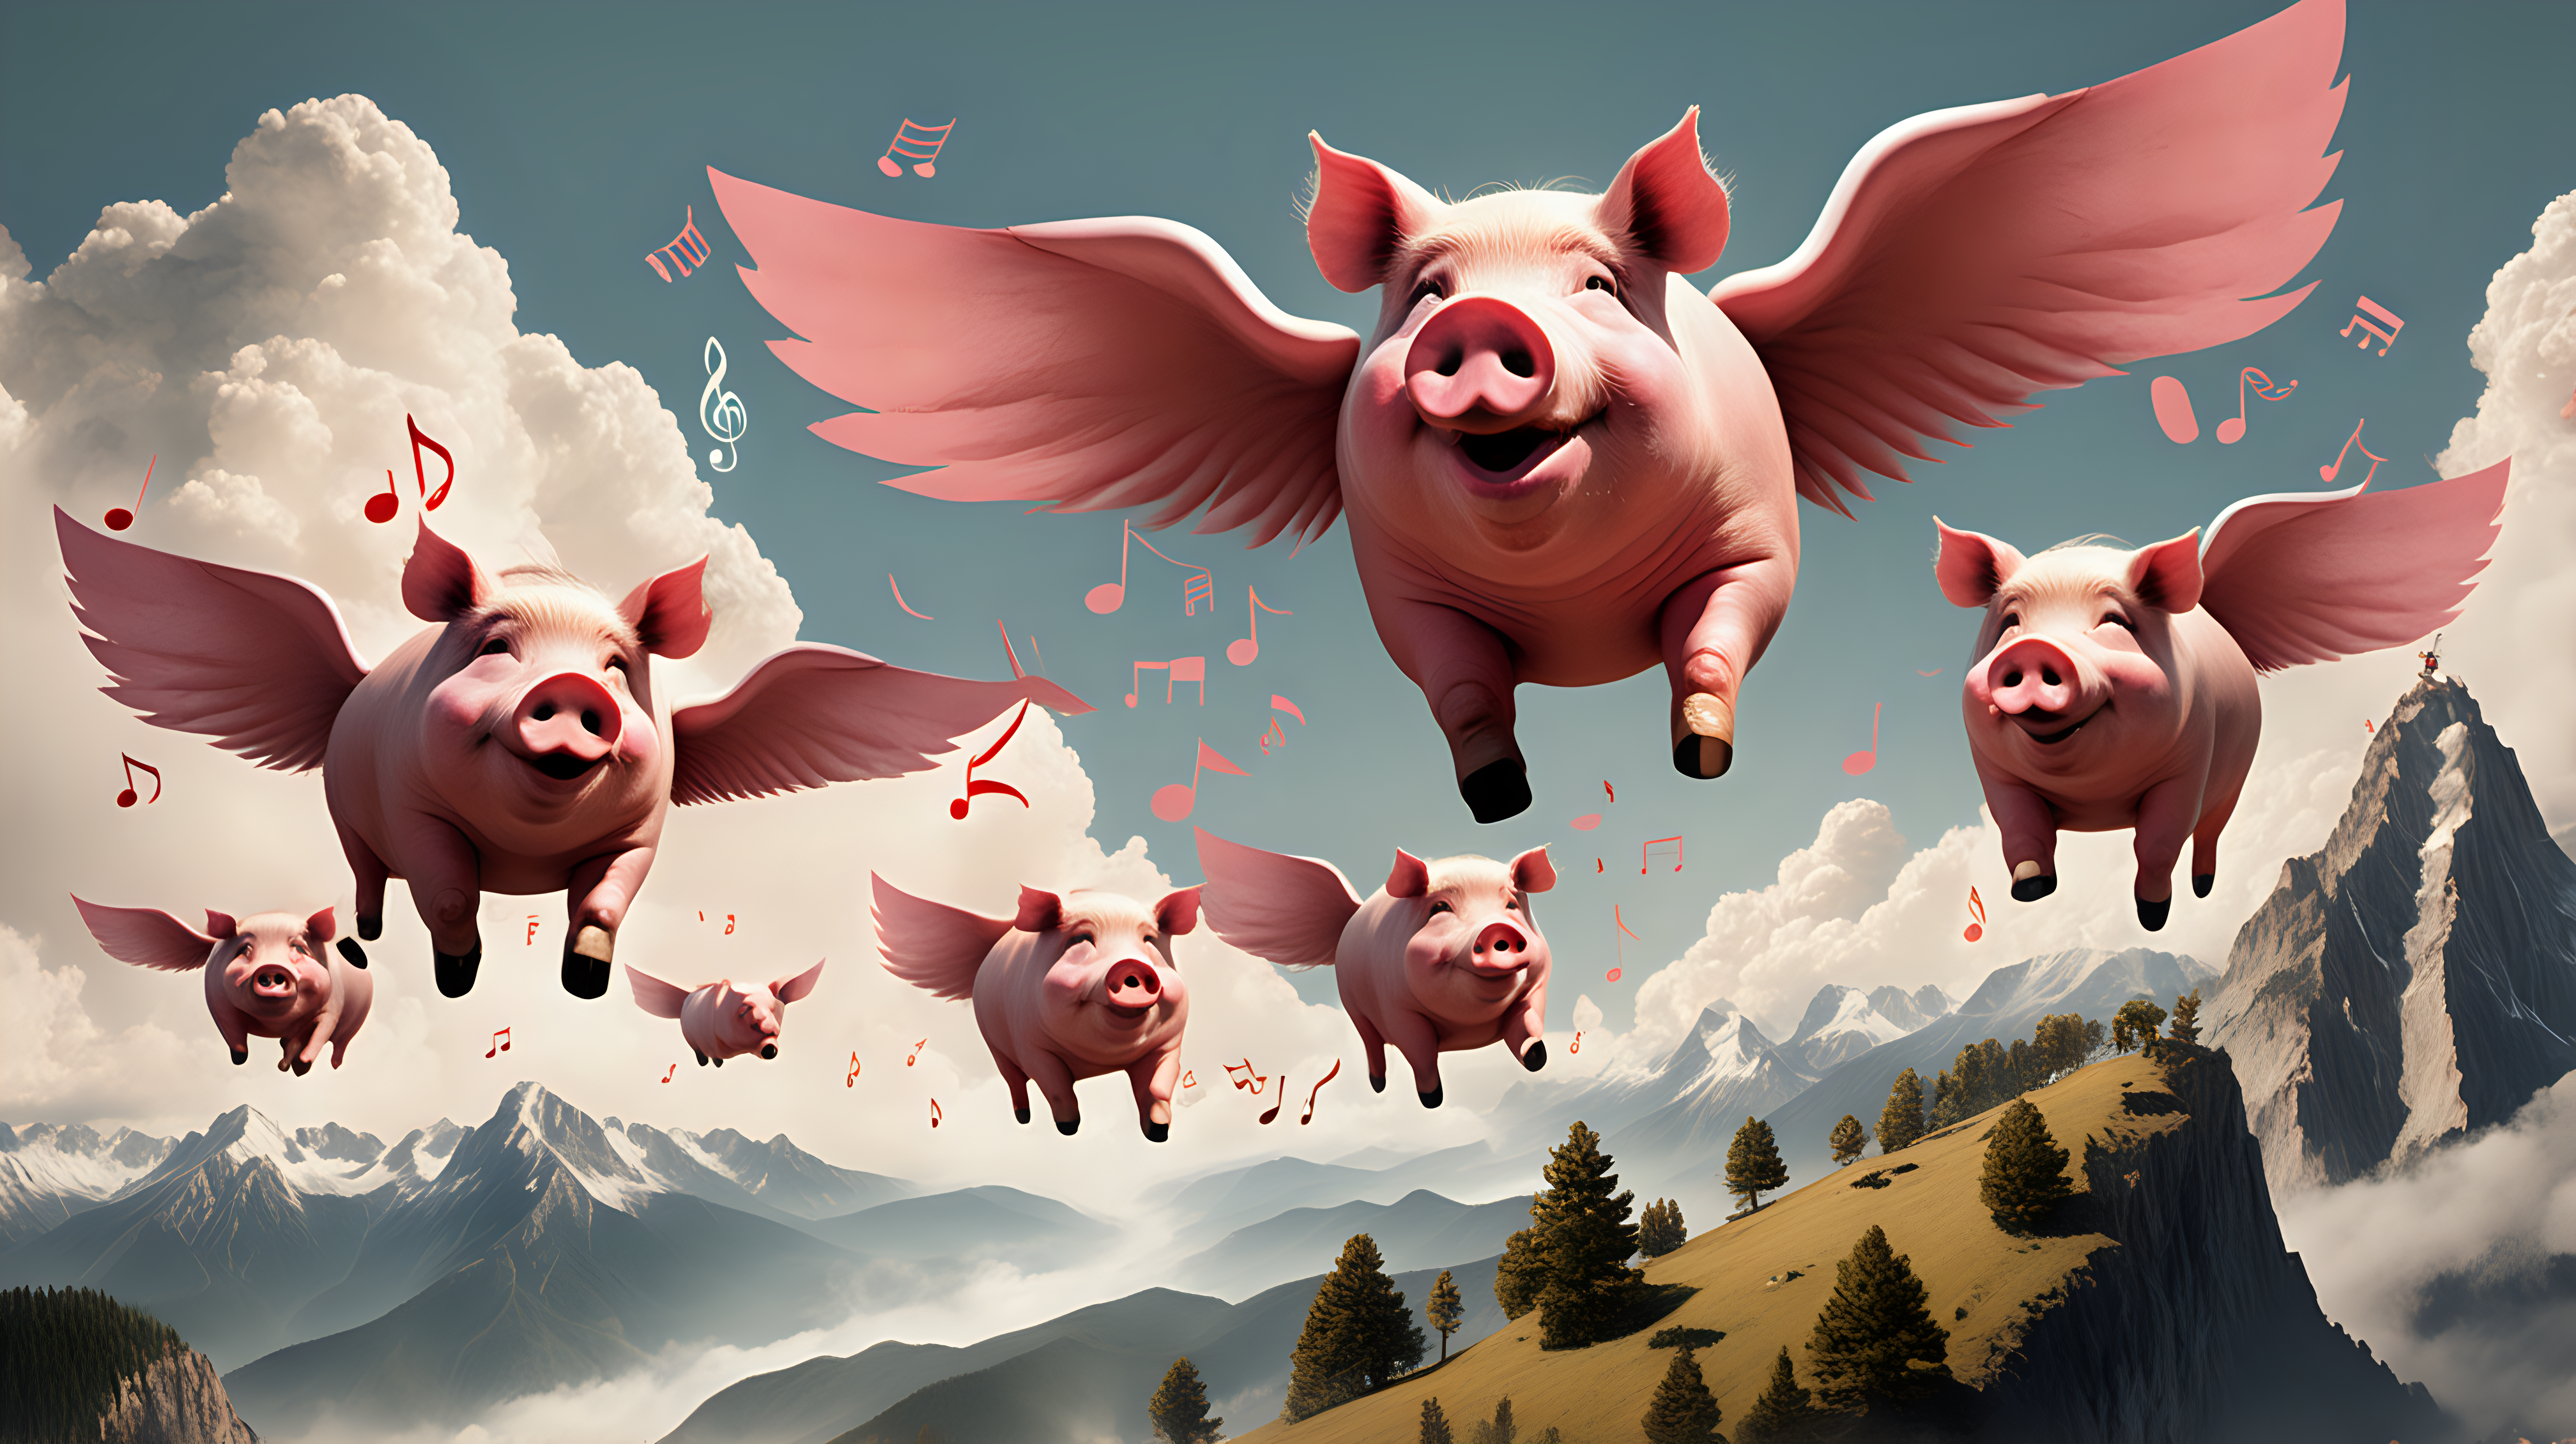 Giant pigs flying over a mountain rim spewing